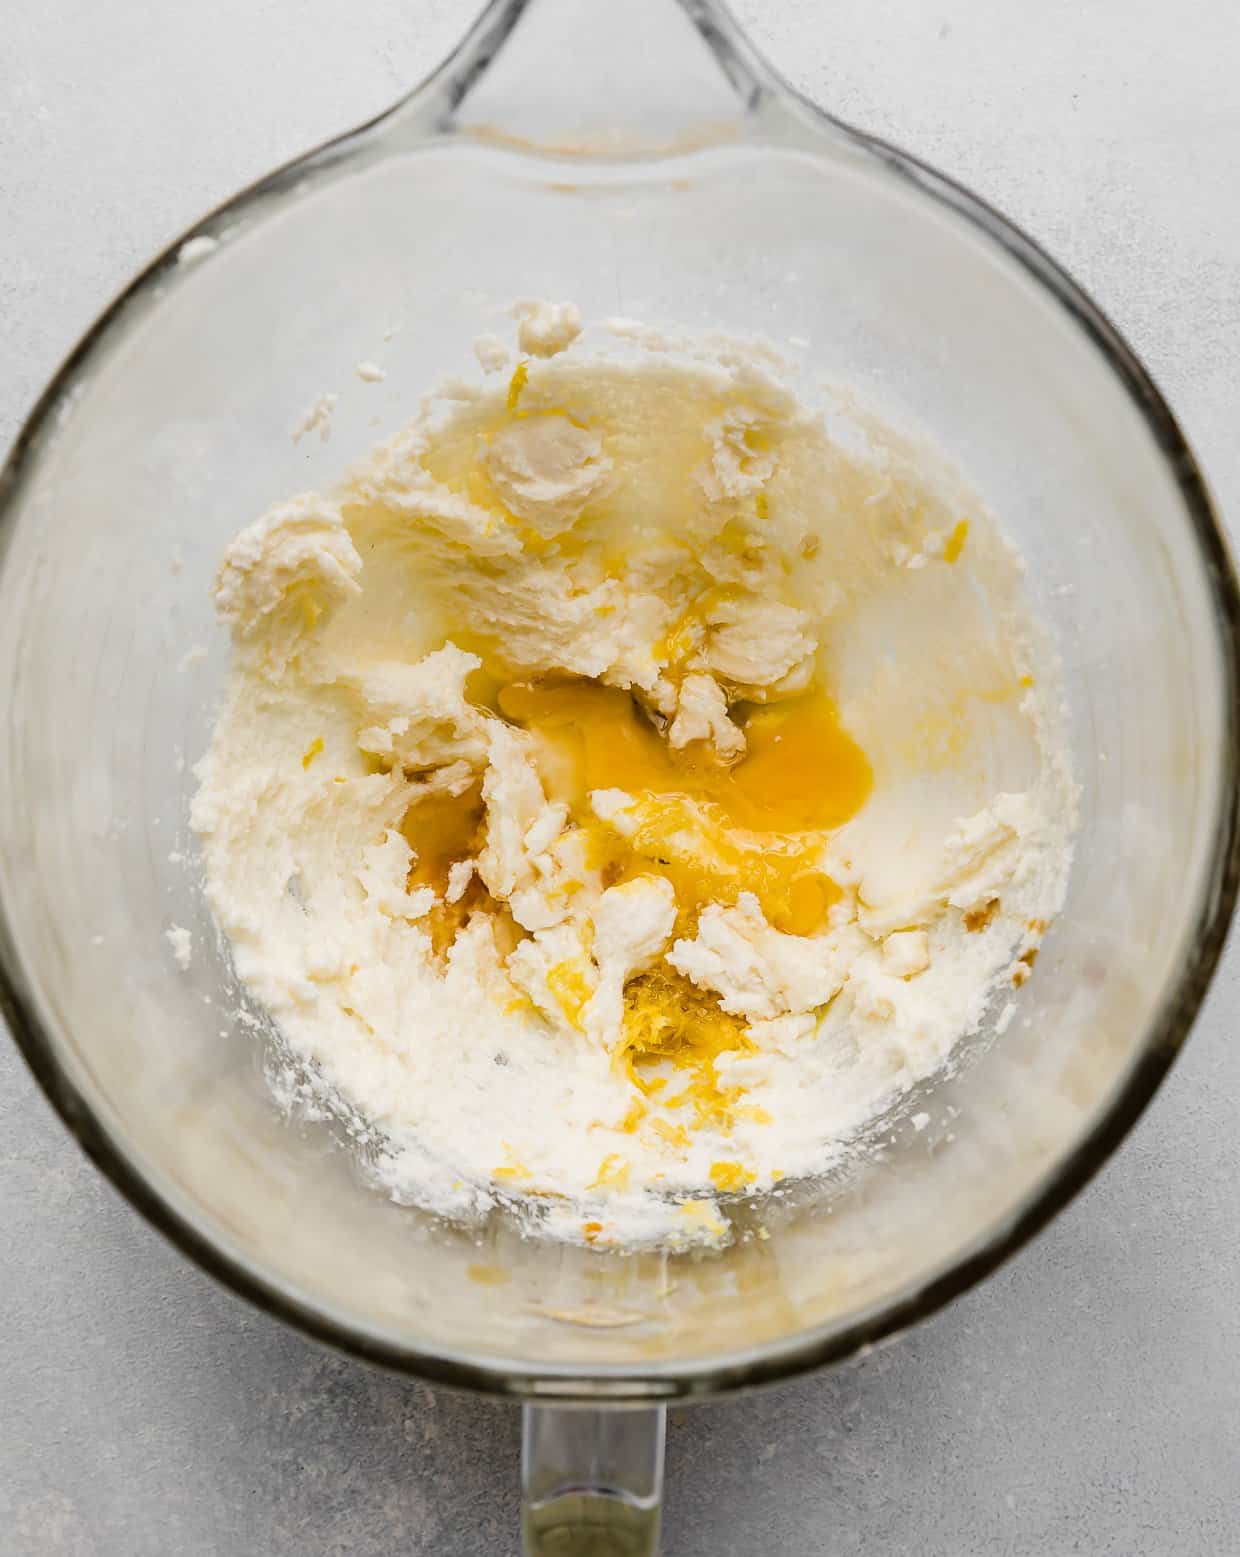 Creamed butter and sugar with egg and lemon zest in a glass bowl.